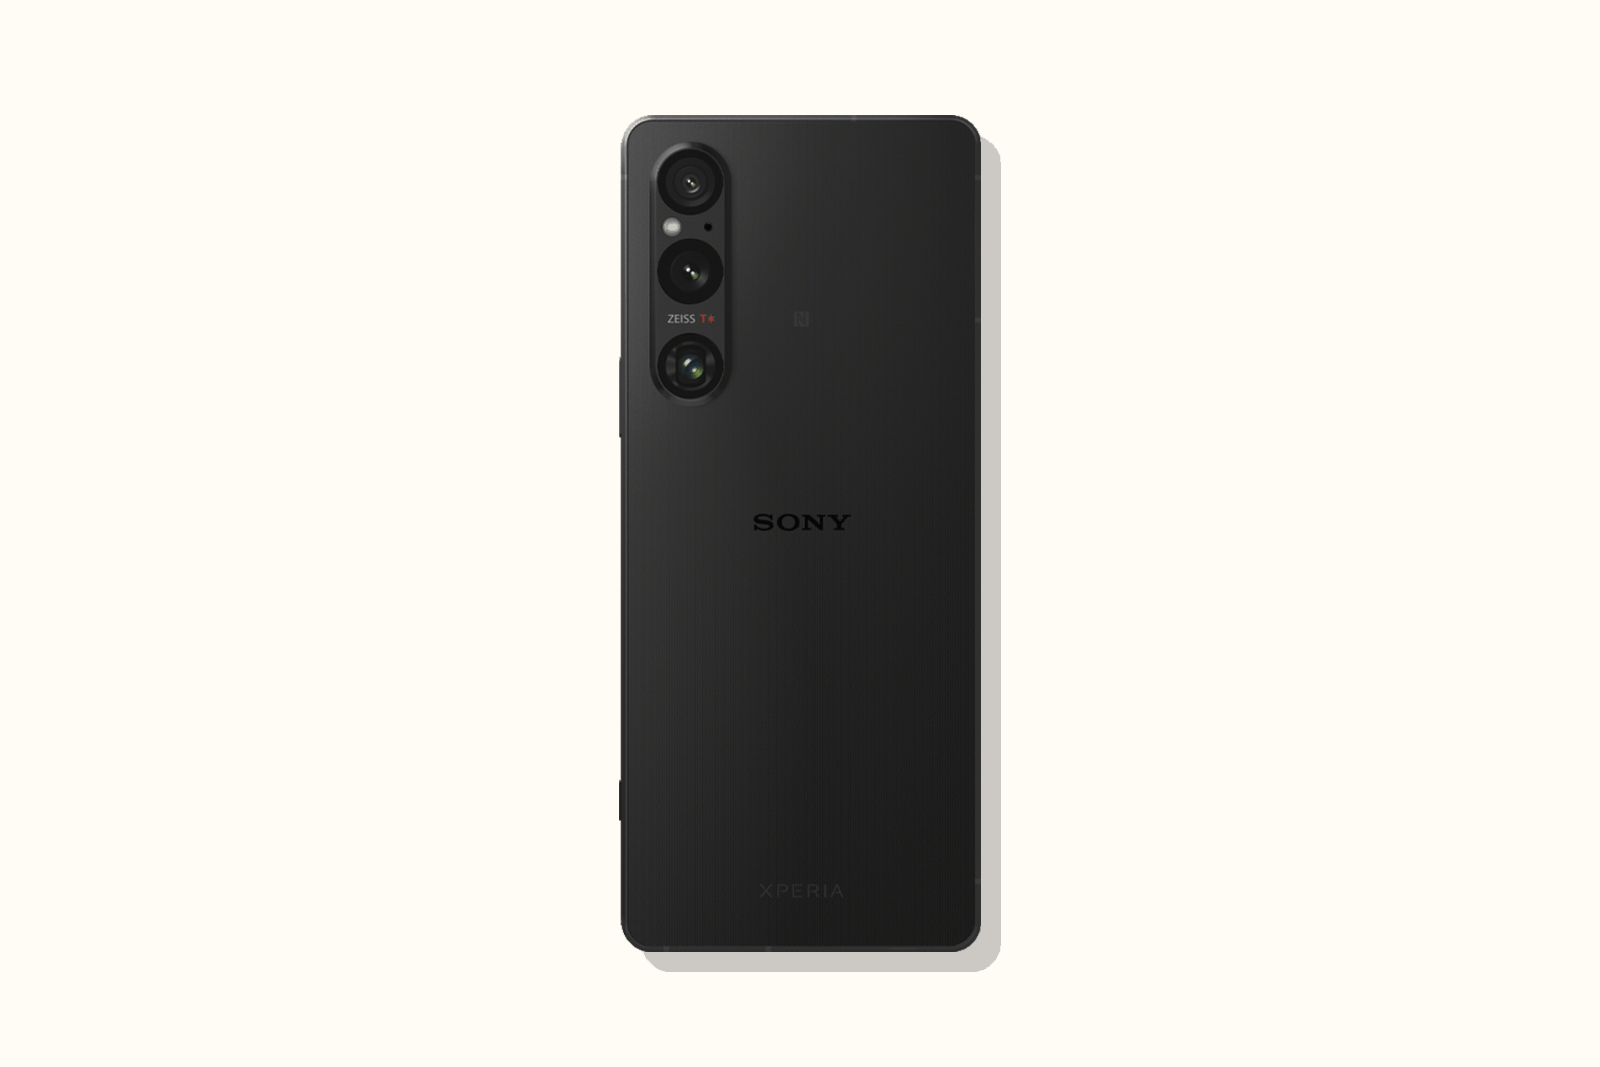 A featured image with the Sony Xperia 1 V at the center